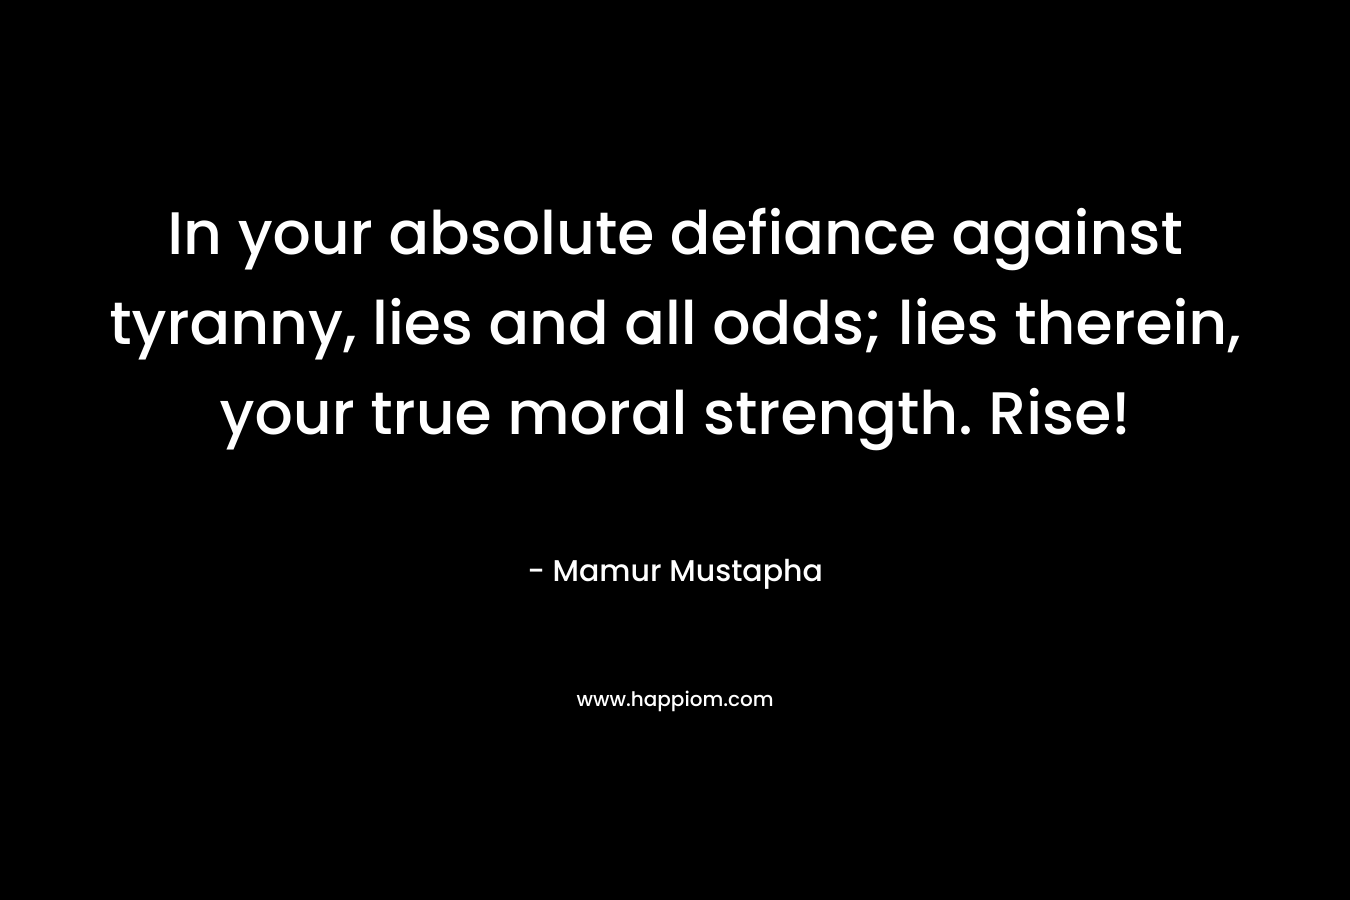 In your absolute defiance against tyranny, lies and all odds; lies therein, your true moral strength. Rise!